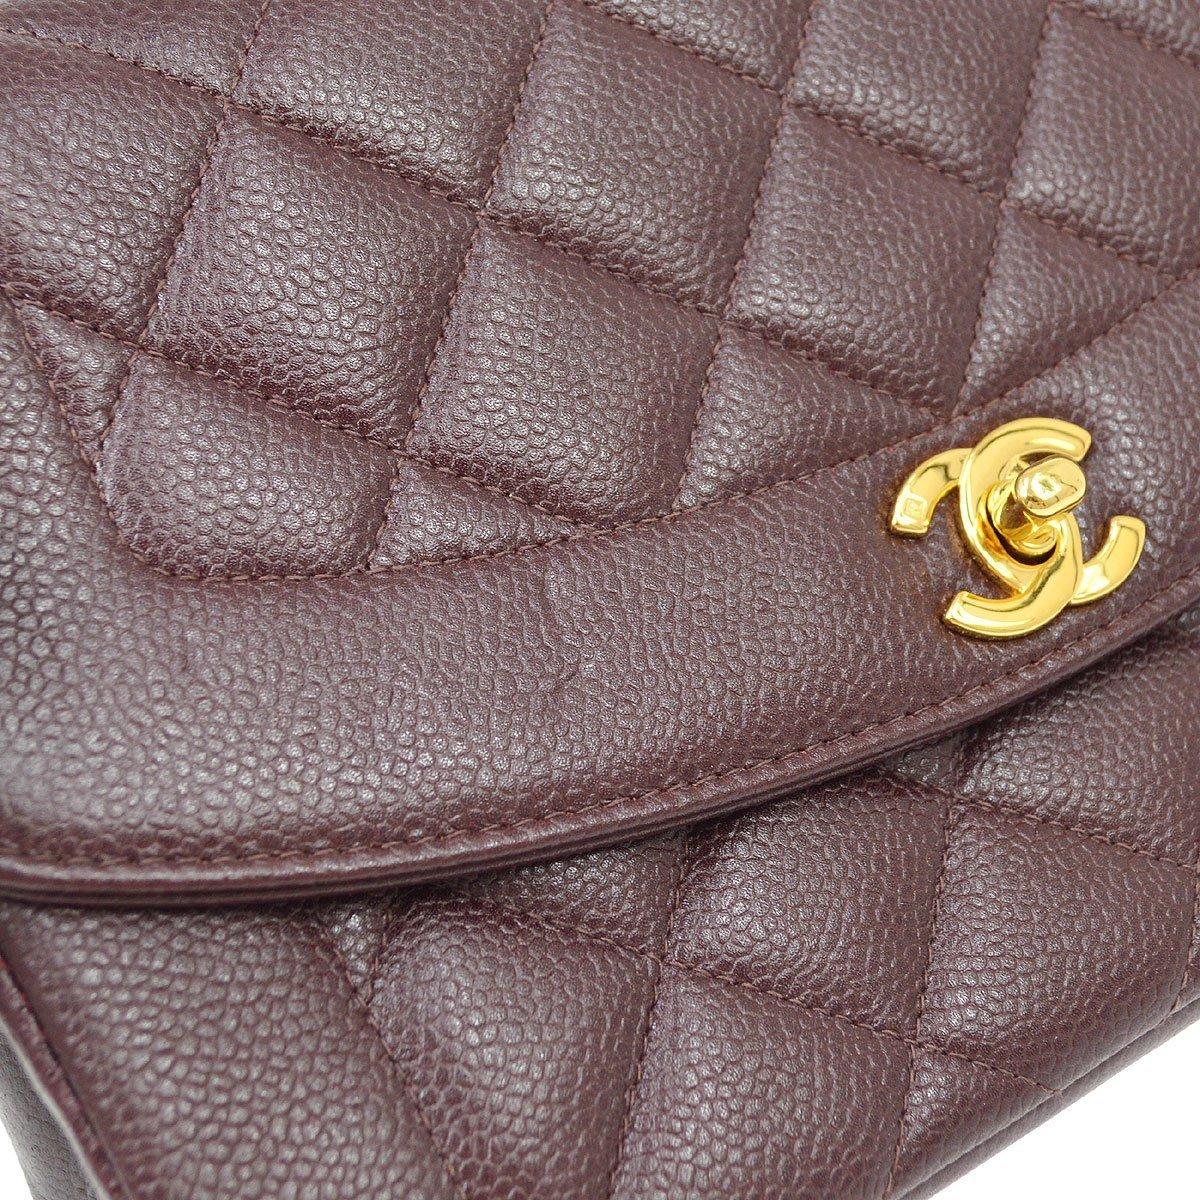 Pre-Owned Vintage Condition
From 1999 Collection
Caviar Leather
Gold Hardware
Leather Lining
Measures 9.75